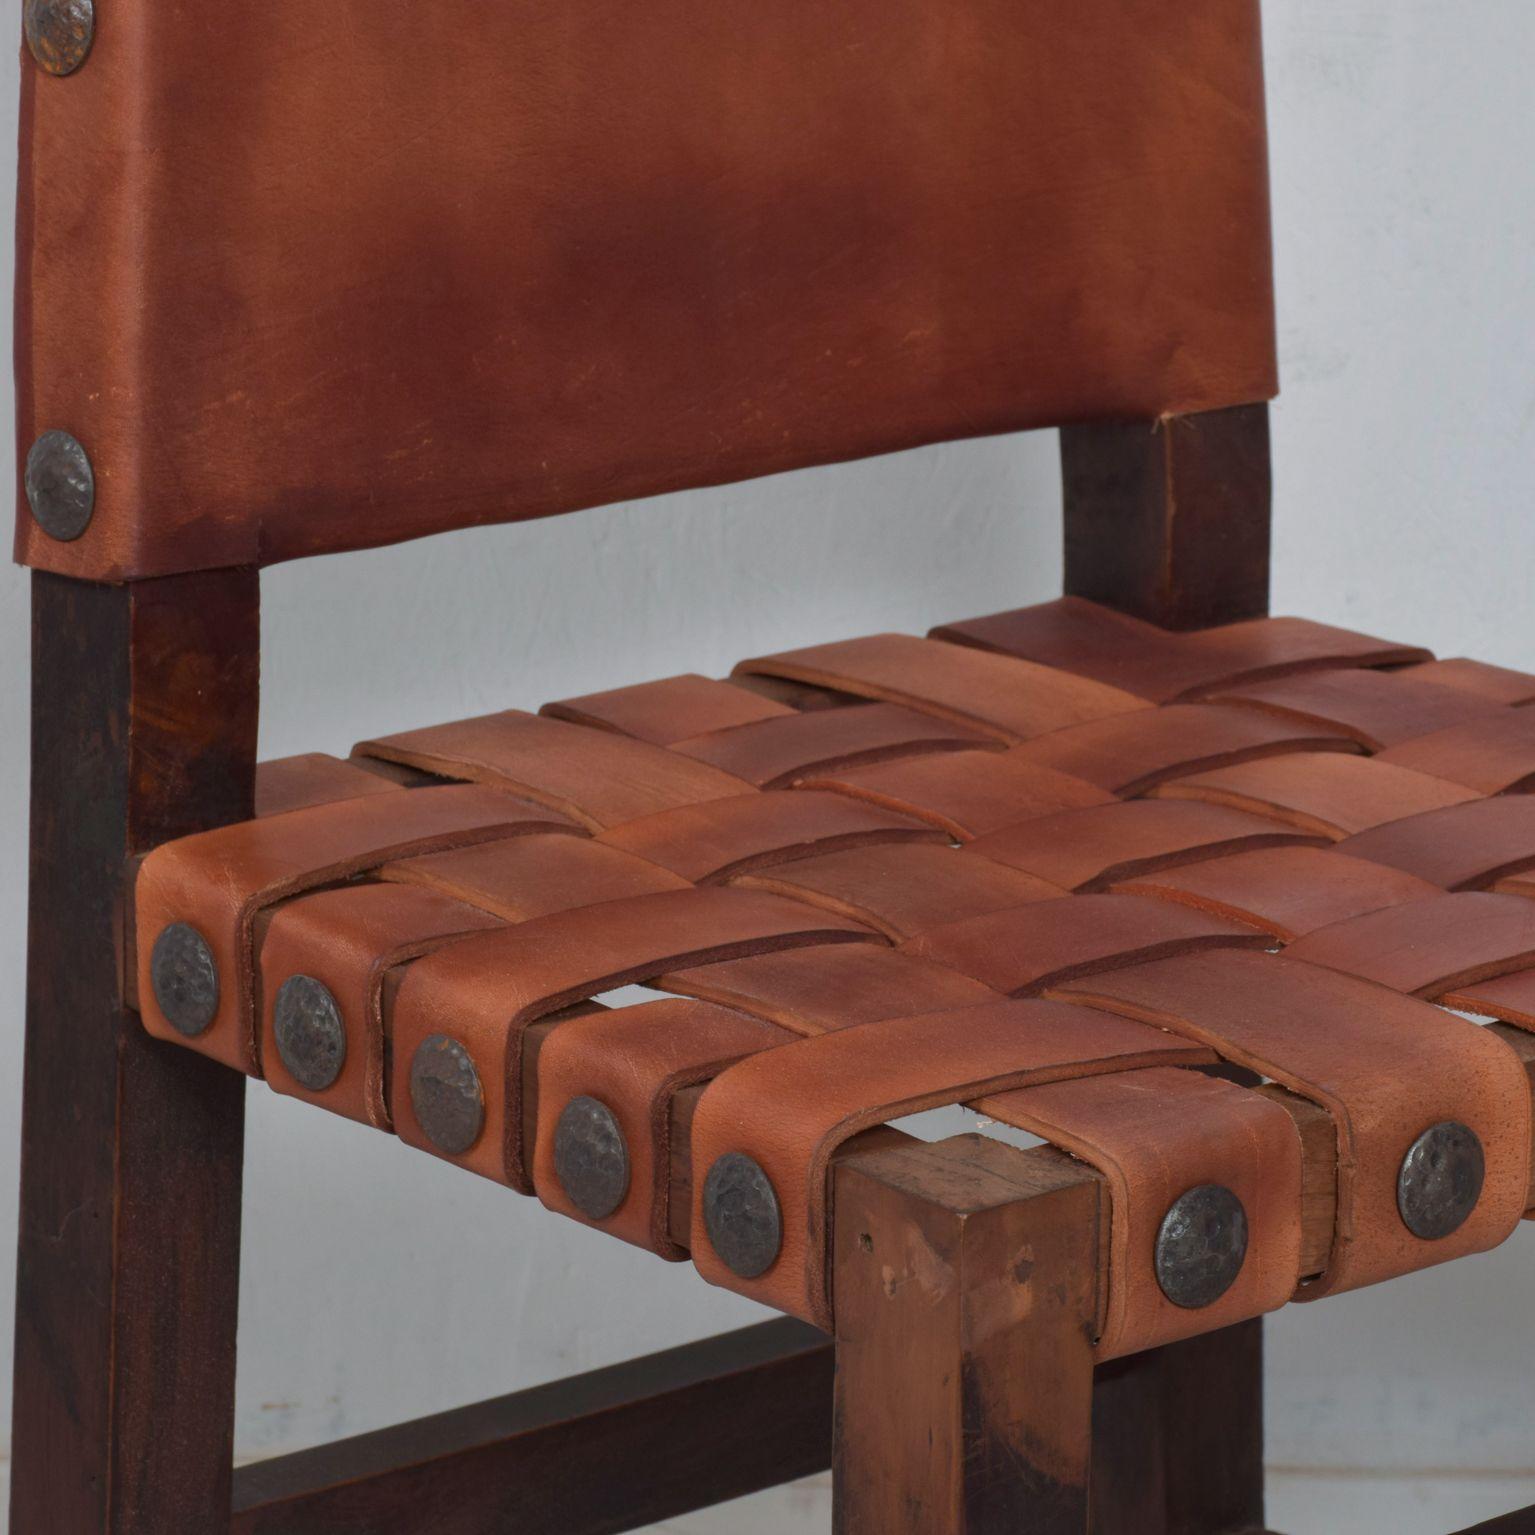 For your consideration: A pair of Spanish Colonial Wood Chairs. Featuring new saddle leather. Made in Mexico circa 1950s.

Heavy woven strap leather seats with nail head accent.

In the manner of Clara Porset and Luis Barragan. No signature